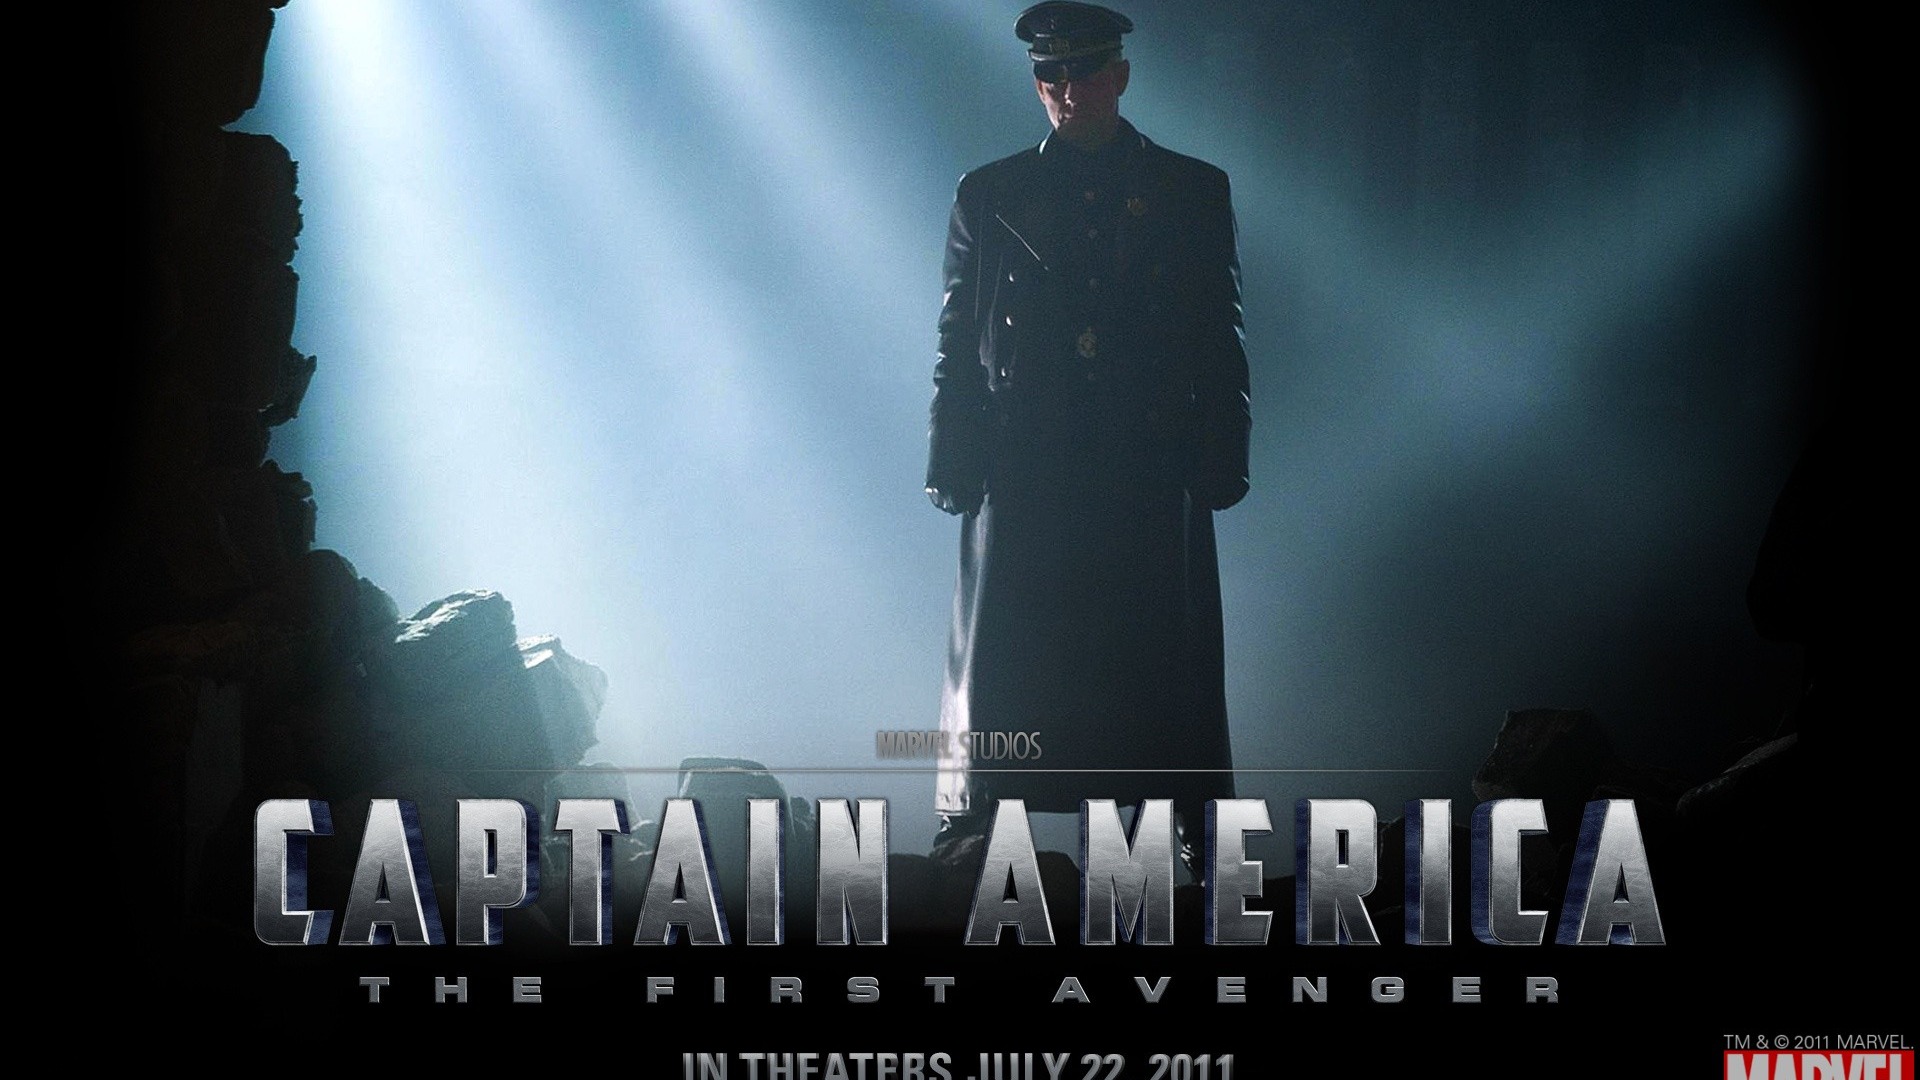 Captain America: The First Avenger wallpapers HD #19 - 1920x1080